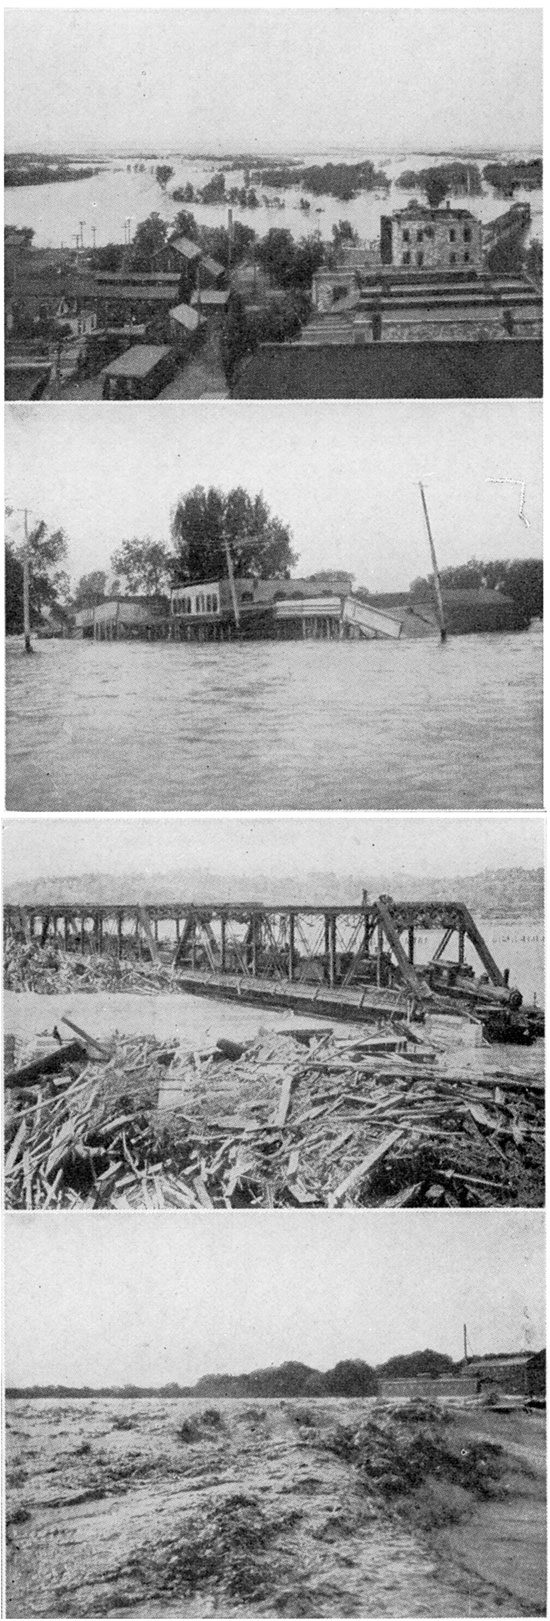 Black and white photos of Kansas river valley during the flood of 1903.